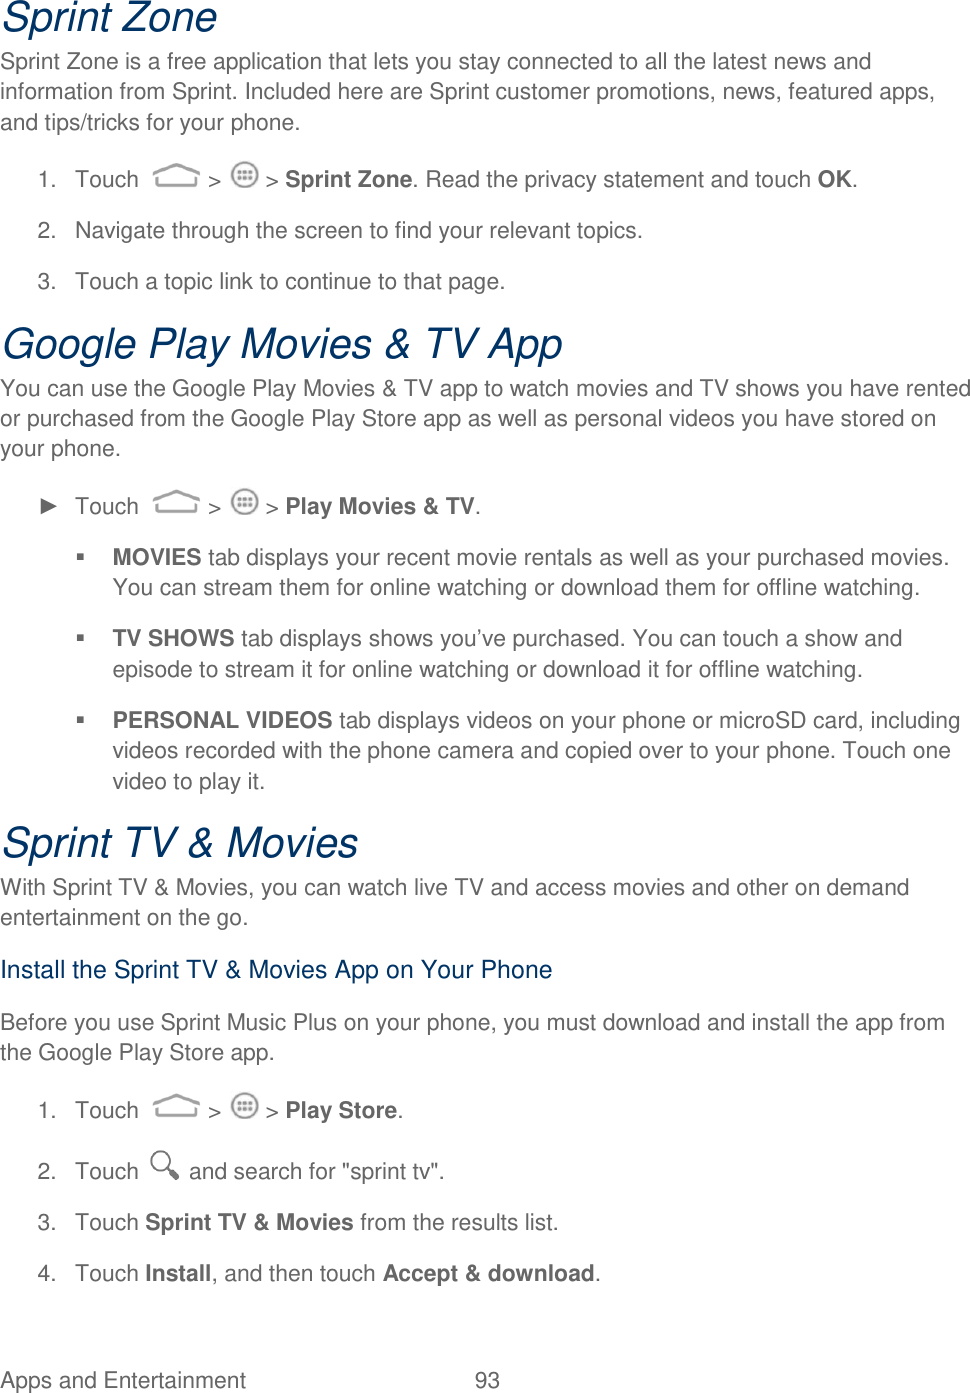 Apps and Entertainment  93   Sprint Zone Sprint Zone is a free application that lets you stay connected to all the latest news and information from Sprint. Included here are Sprint customer promotions, news, featured apps, and tips/tricks for your phone. 1.  Touch   &gt;   &gt; Sprint Zone. Read the privacy statement and touch OK. 2.  Navigate through the screen to find your relevant topics. 3.  Touch a topic link to continue to that page. Google Play Movies &amp; TV App You can use the Google Play Movies &amp; TV app to watch movies and TV shows you have rented or purchased from the Google Play Store app as well as personal videos you have stored on your phone. ►  Touch   &gt;   &gt; Play Movies &amp; TV.  MOVIES tab displays your recent movie rentals as well as your purchased movies. You can stream them for online watching or download them for offline watching.  TV SHOWS tab displays shows you‟ve purchased. You can touch a show and episode to stream it for online watching or download it for offline watching.  PERSONAL VIDEOS tab displays videos on your phone or microSD card, including videos recorded with the phone camera and copied over to your phone. Touch one video to play it. Sprint TV &amp; Movies With Sprint TV &amp; Movies, you can watch live TV and access movies and other on demand entertainment on the go. Install the Sprint TV &amp; Movies App on Your Phone Before you use Sprint Music Plus on your phone, you must download and install the app from the Google Play Store app. 1.  Touch   &gt;   &gt; Play Store. 2.  Touch   and search for &quot;sprint tv&quot;. 3.  Touch Sprint TV &amp; Movies from the results list. 4.  Touch Install, and then touch Accept &amp; download. 